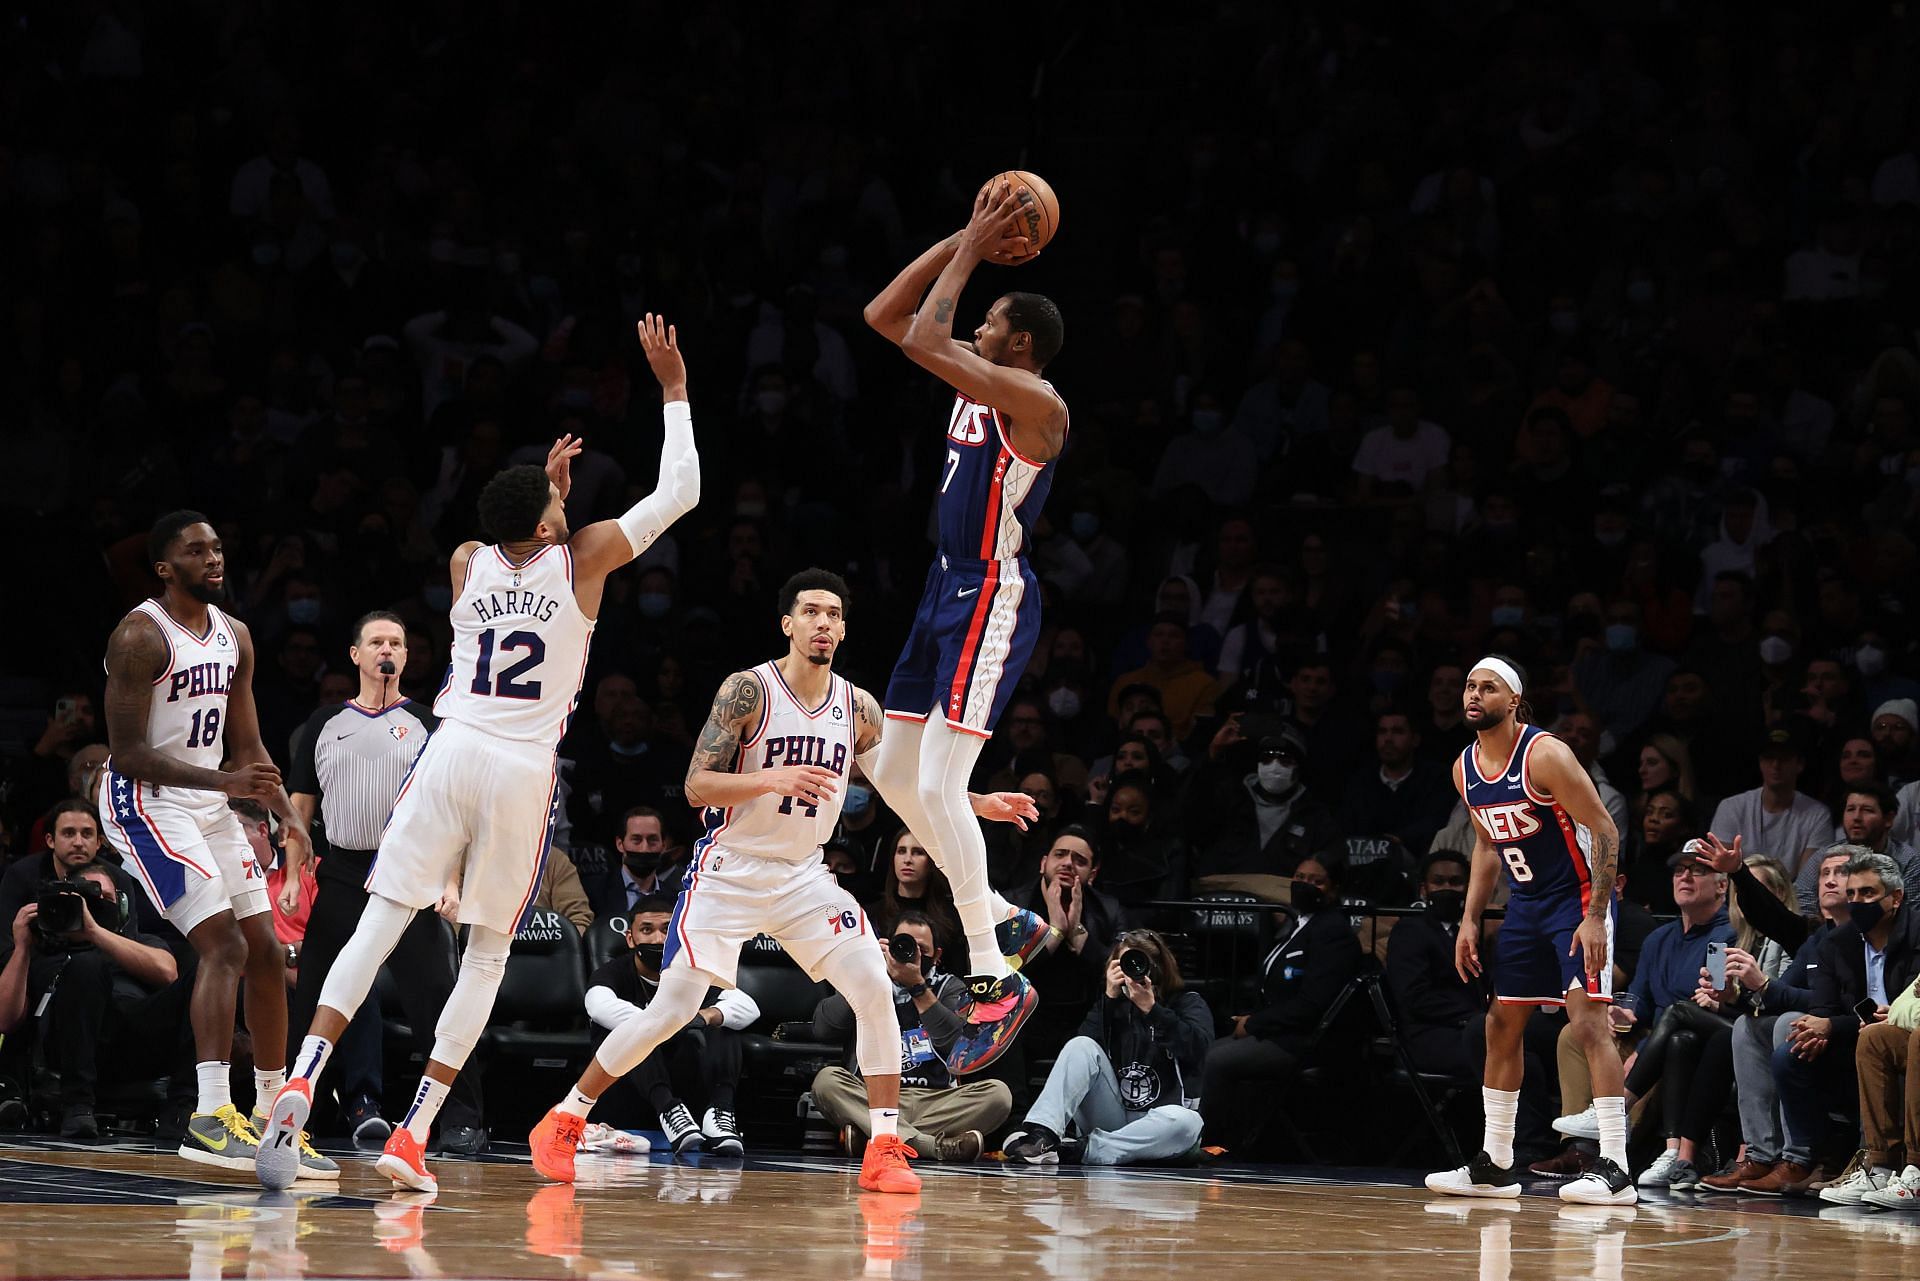 The Brooklyn Nets will host the Philadelphia 76ers on December 30th